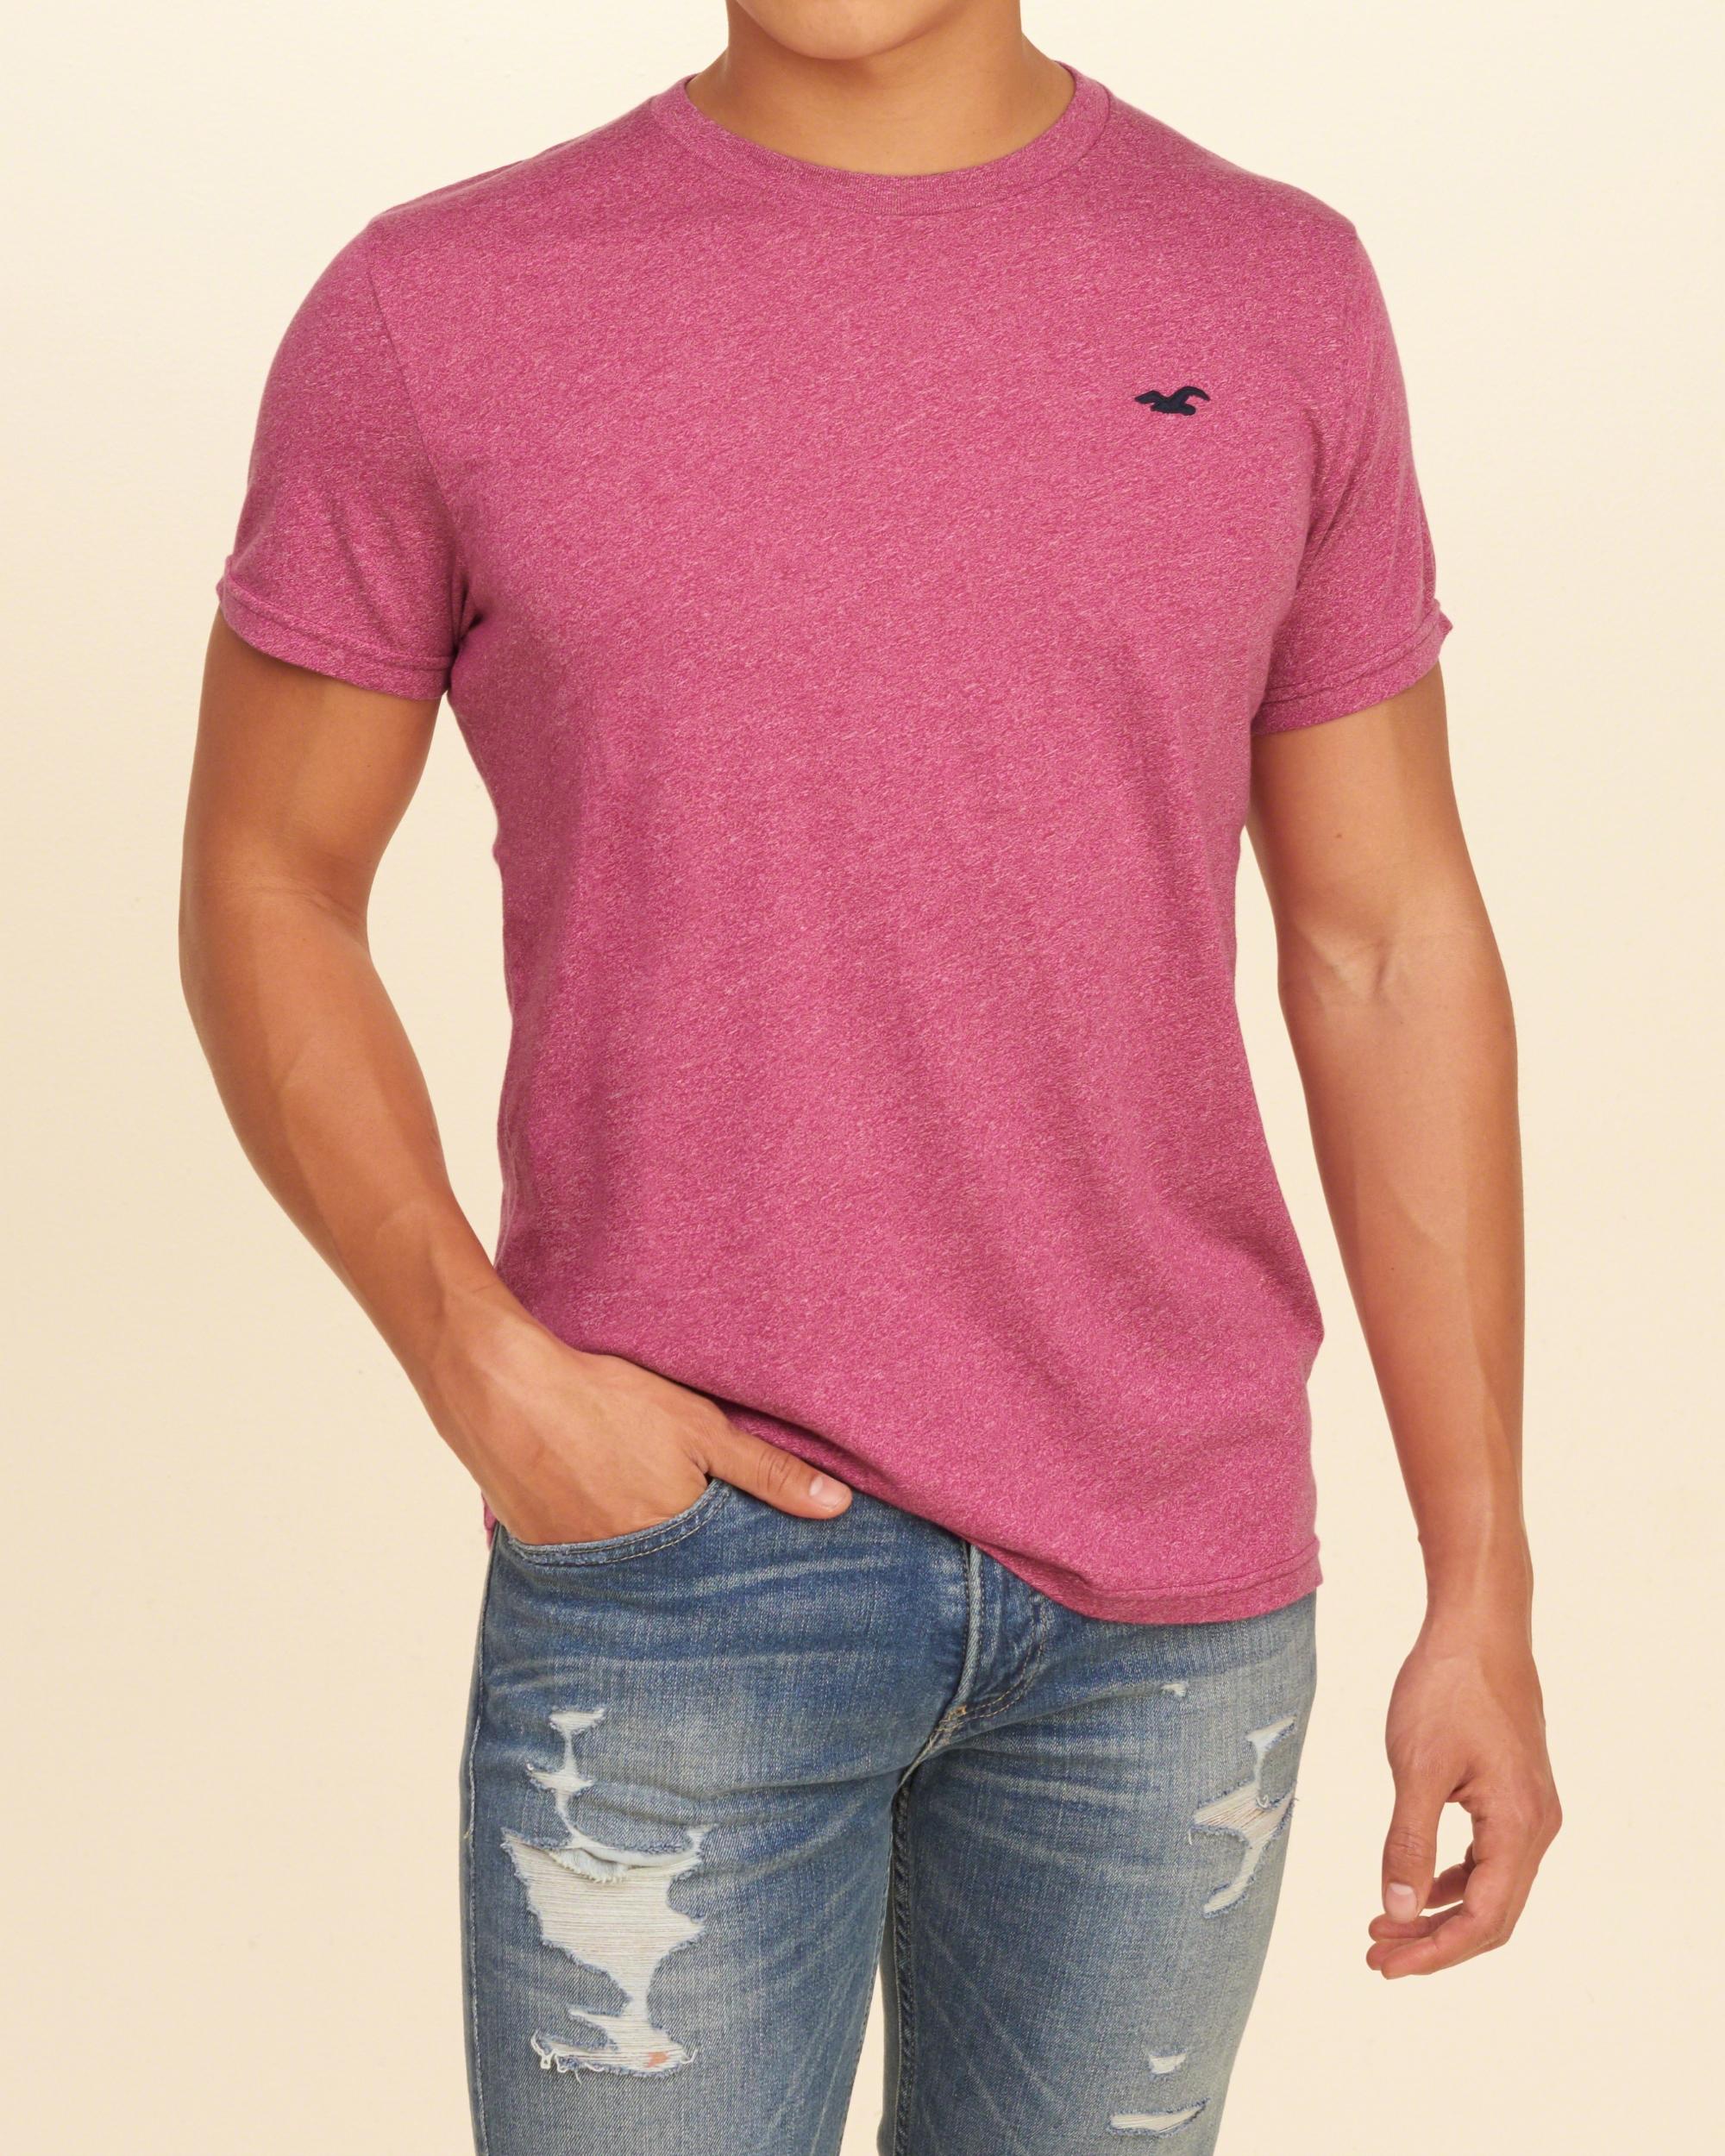 Lyst - Hollister Must-have Crew T-shirt in Pink for Men